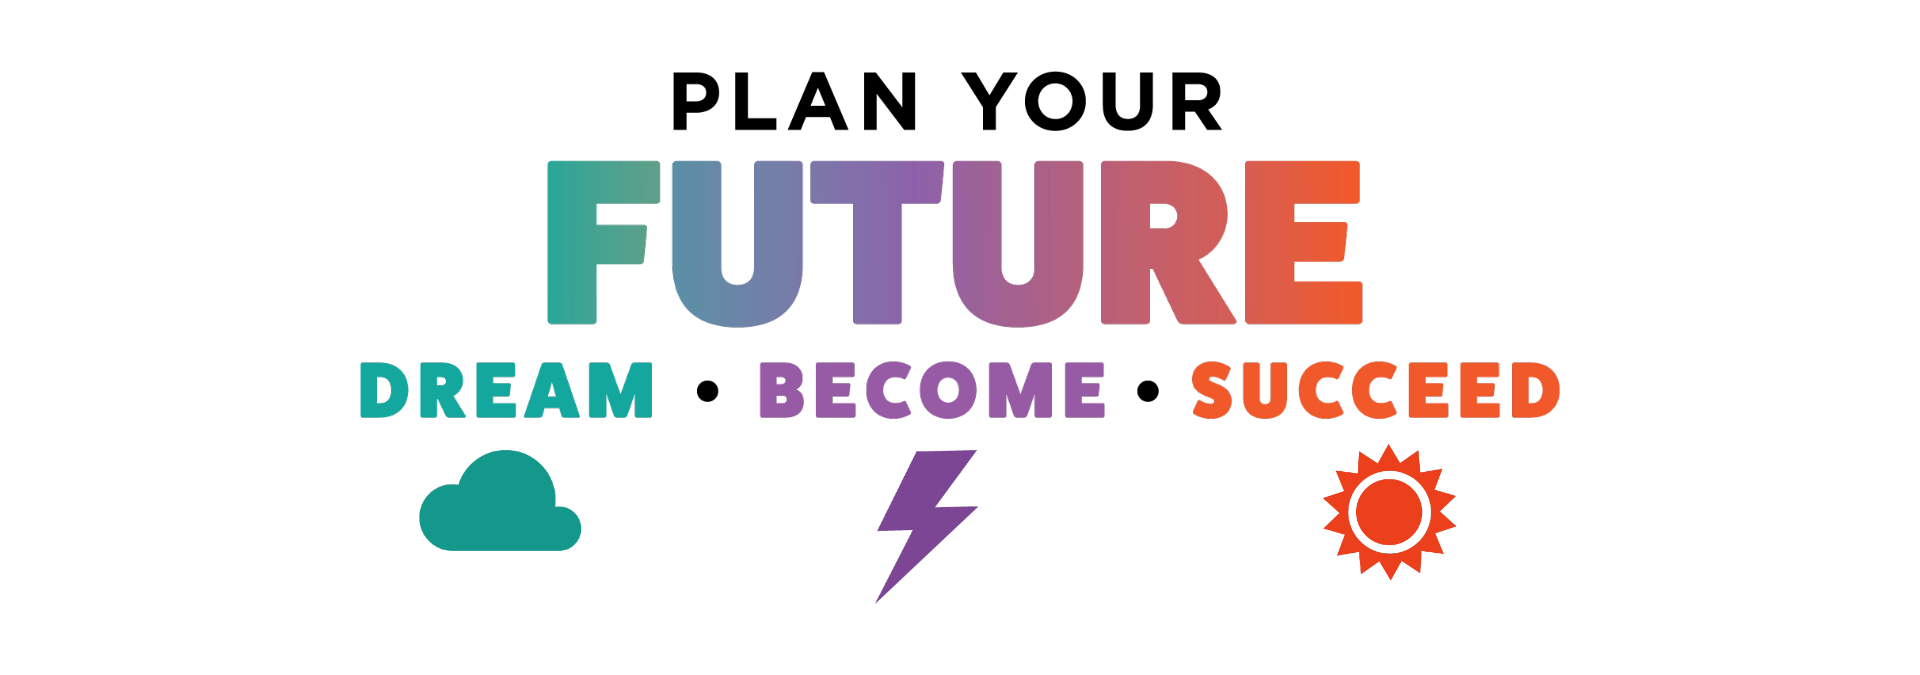 Plan Your Future Dream Become Succeed